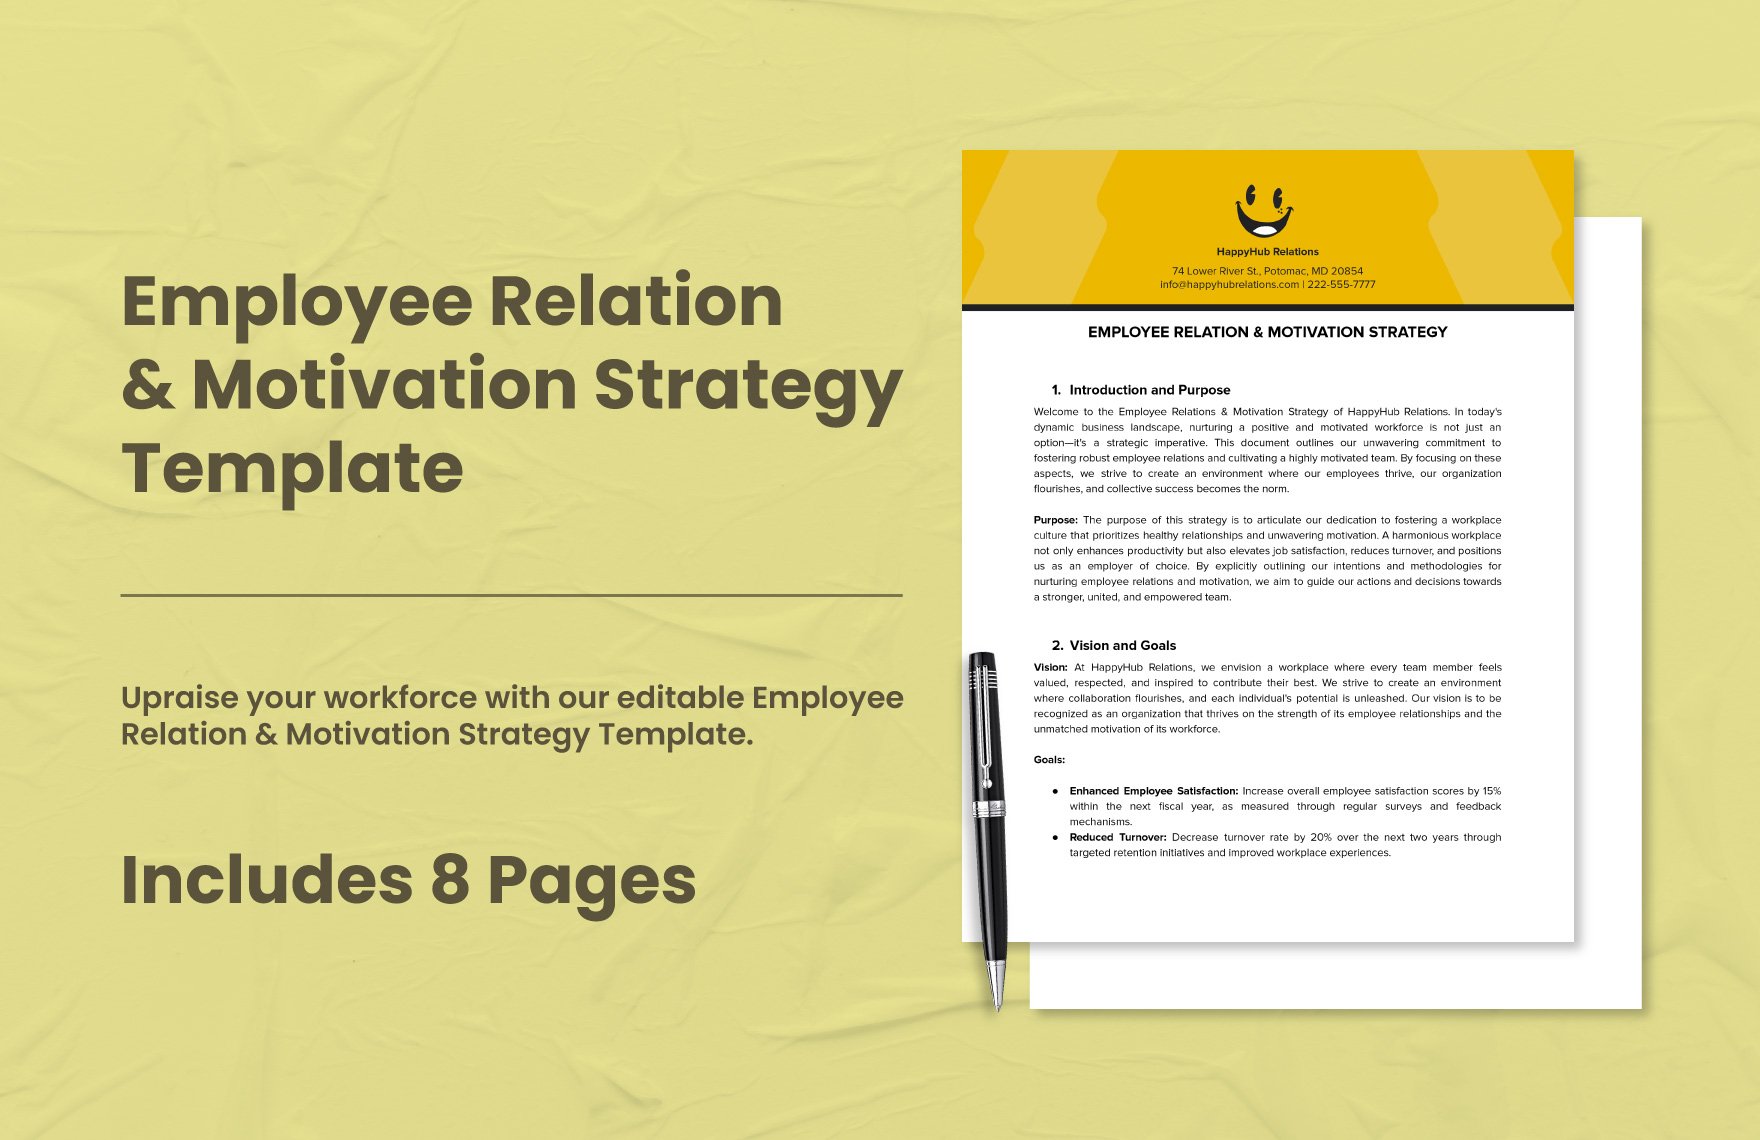 Employee Relation & Motivation Strategy Template